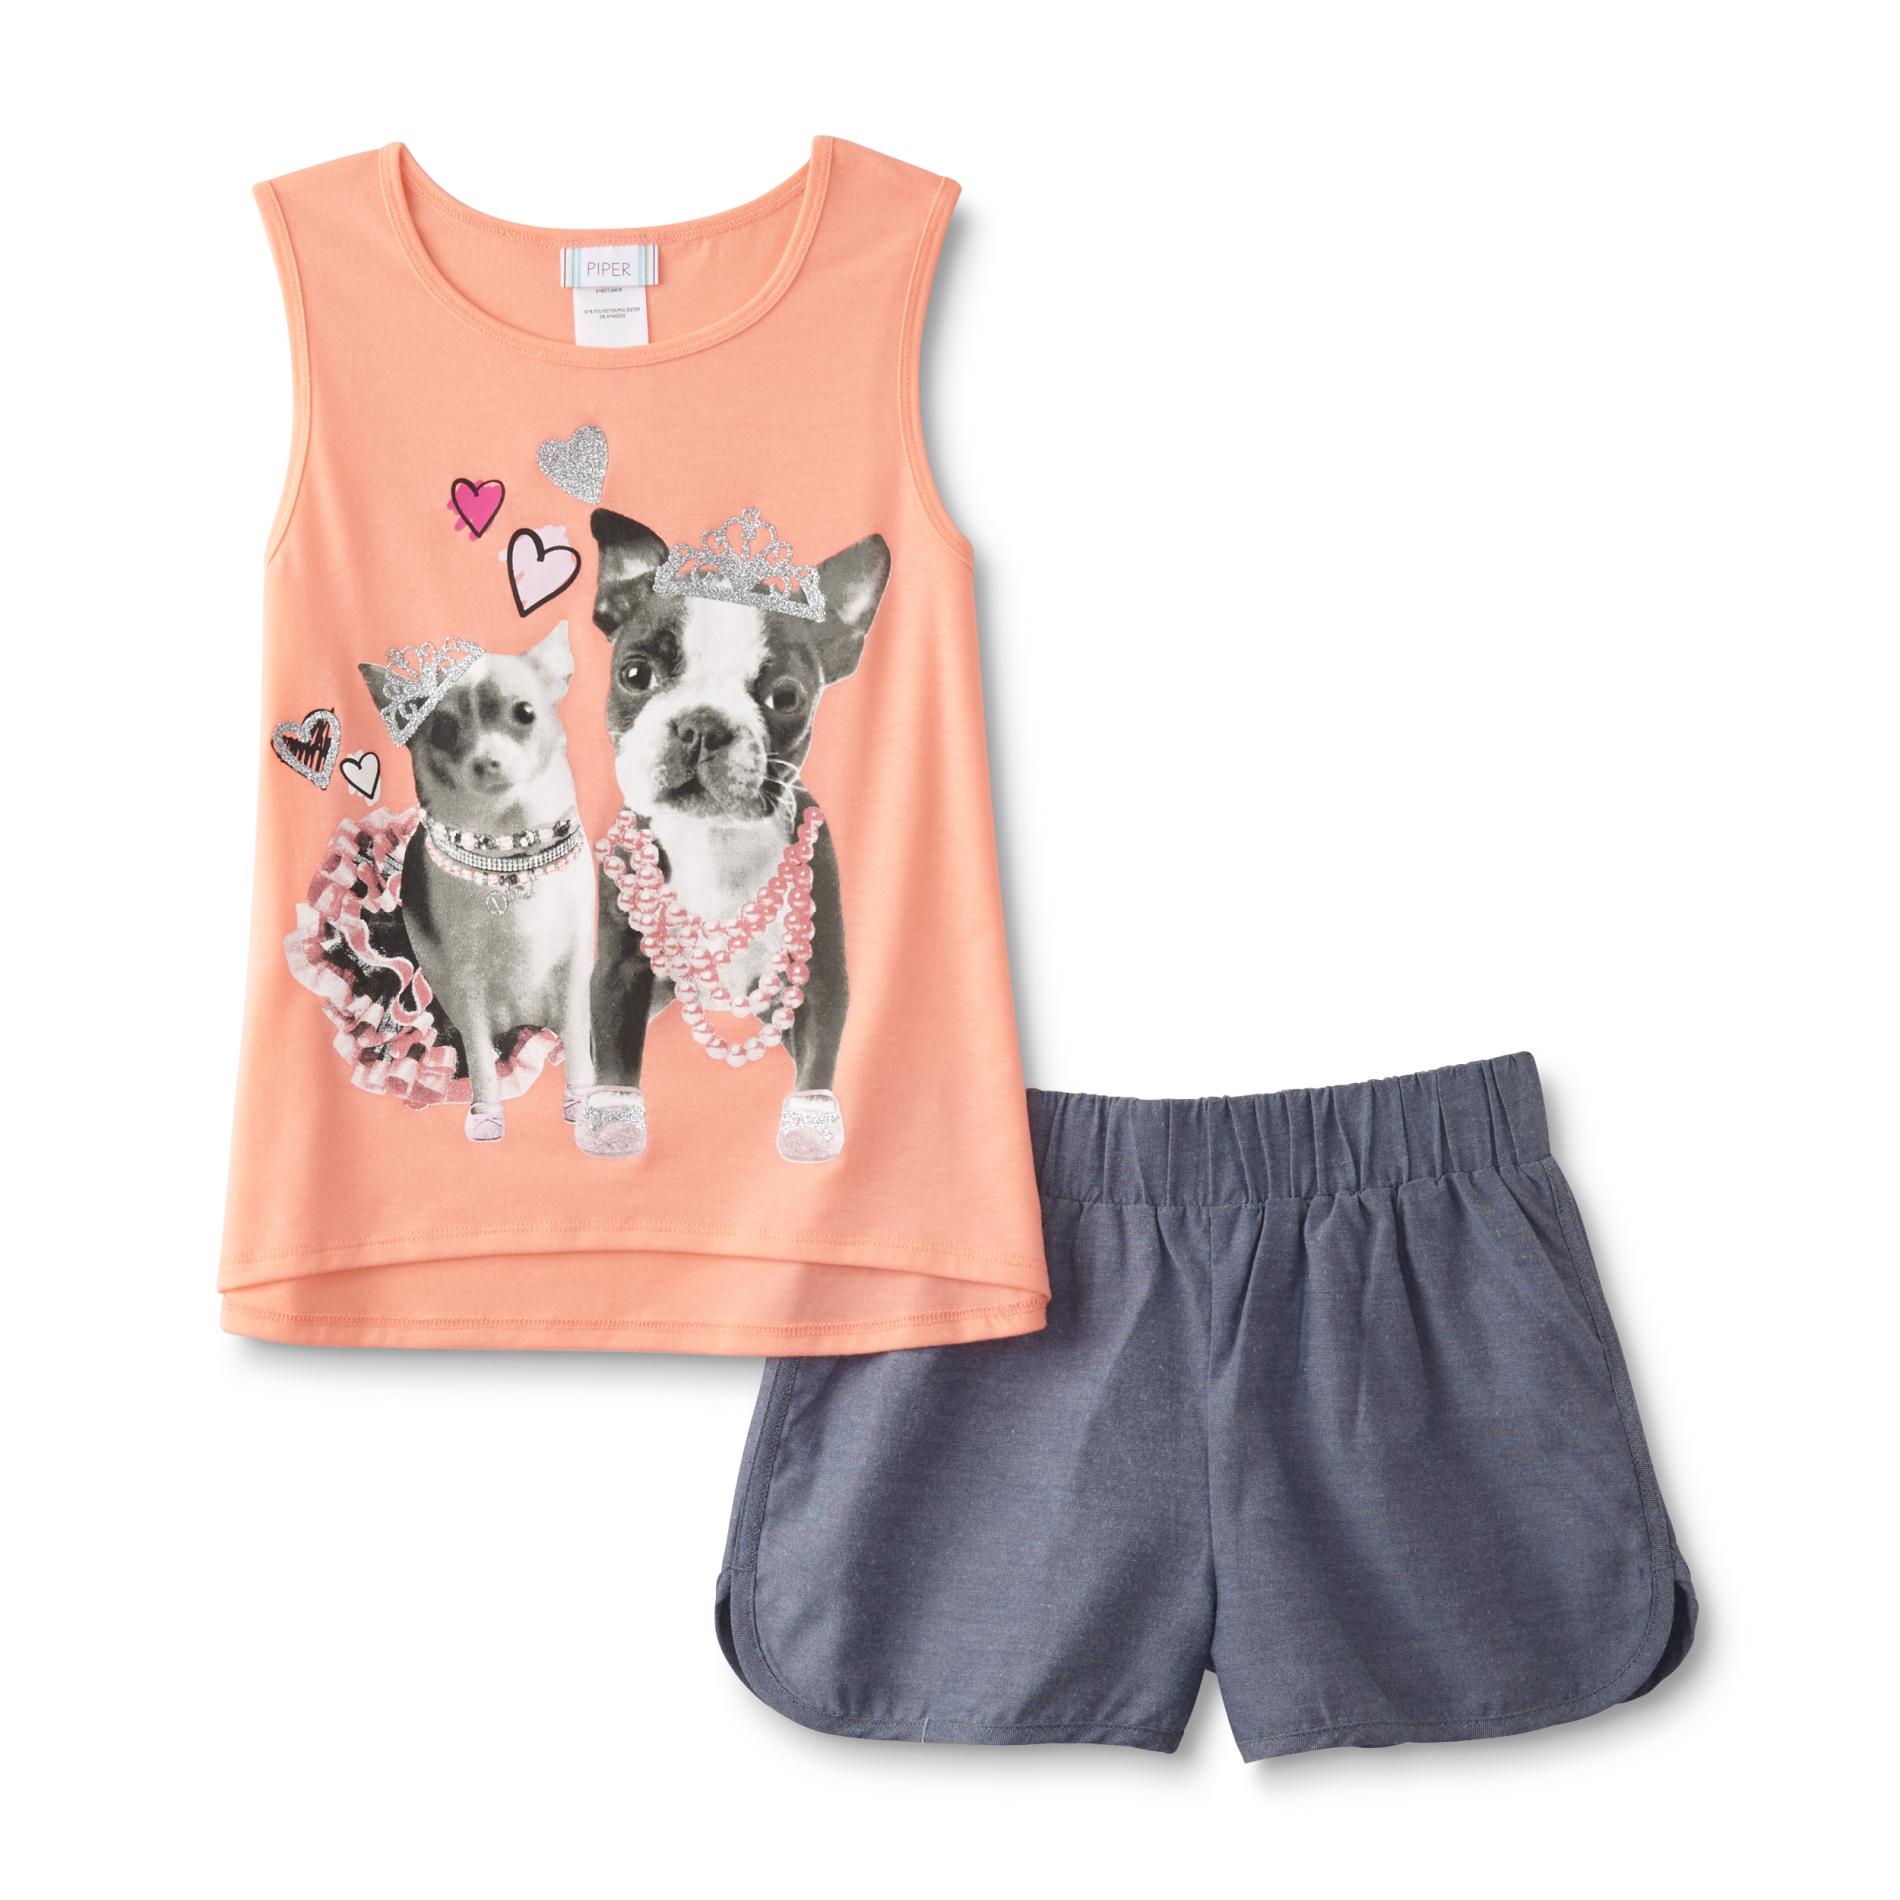 Girl's Graphic Tank Top & Shorts - Dogs